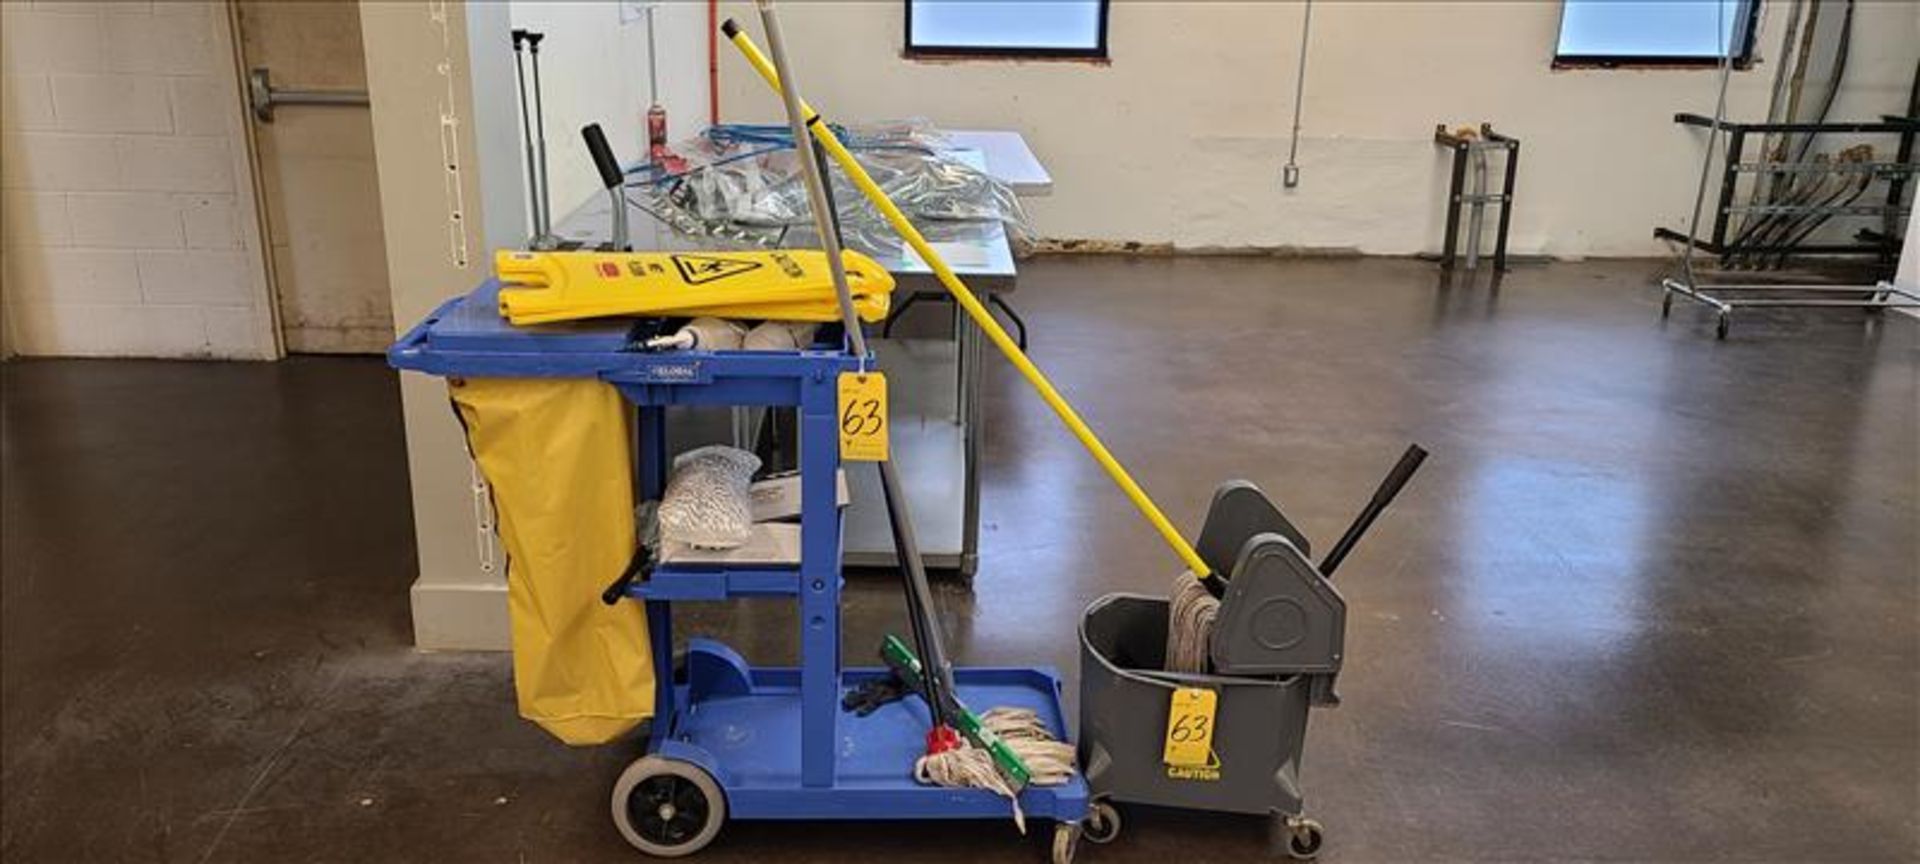 Misc. Cleaning Supplies, Global Industrial Cart, mops, bucket, and wet floor signs.